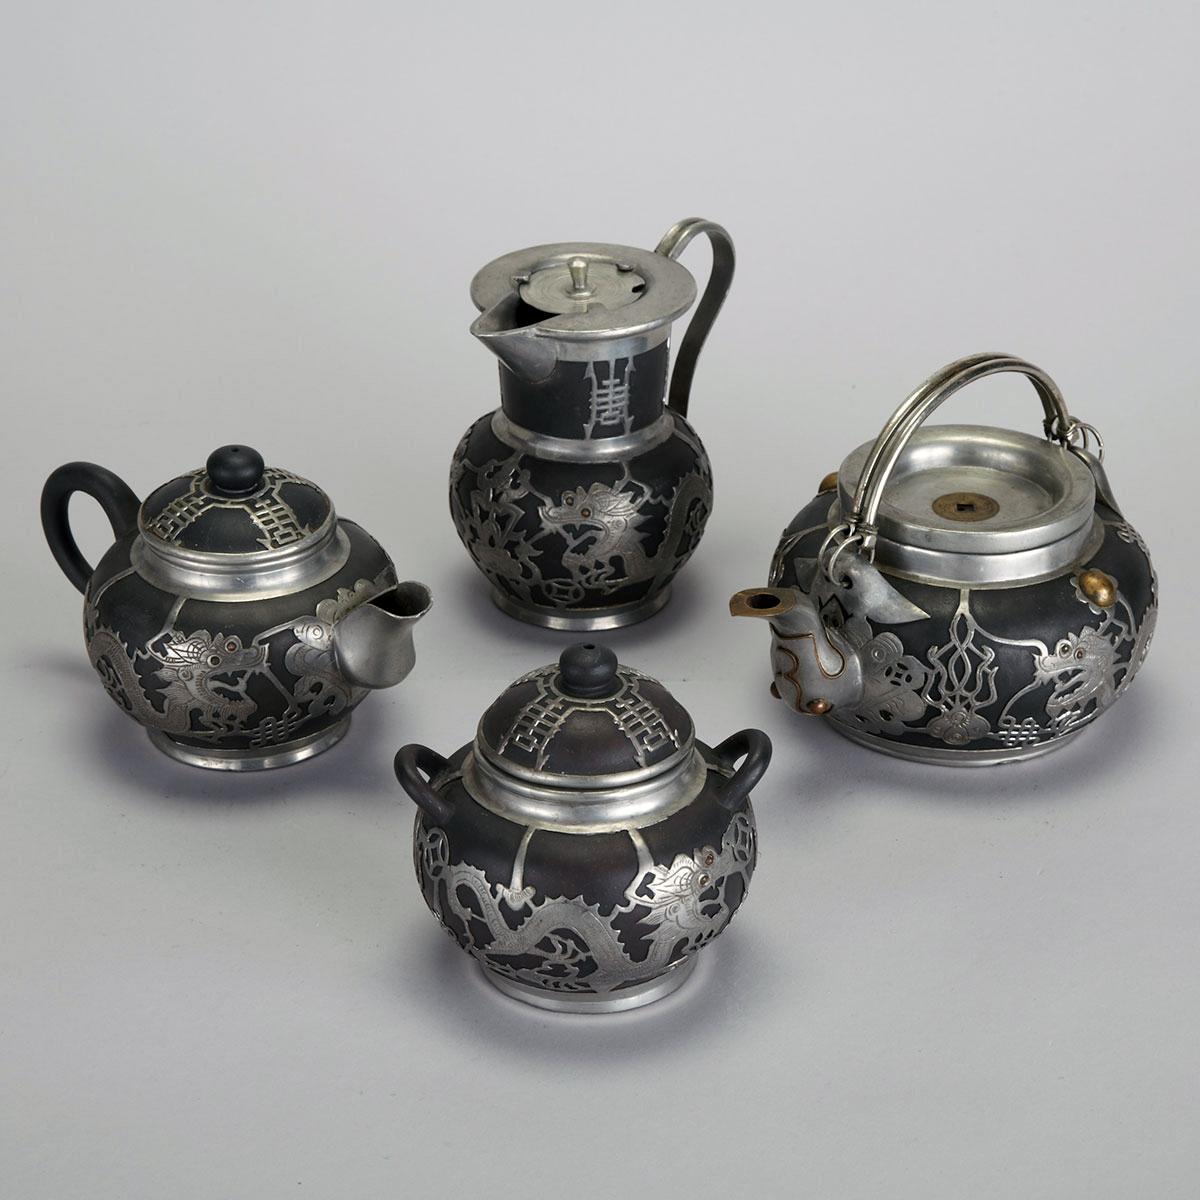 Four-Piece Stone Ware and Pewter Dragon Tea Set, Late Qing Dynasty